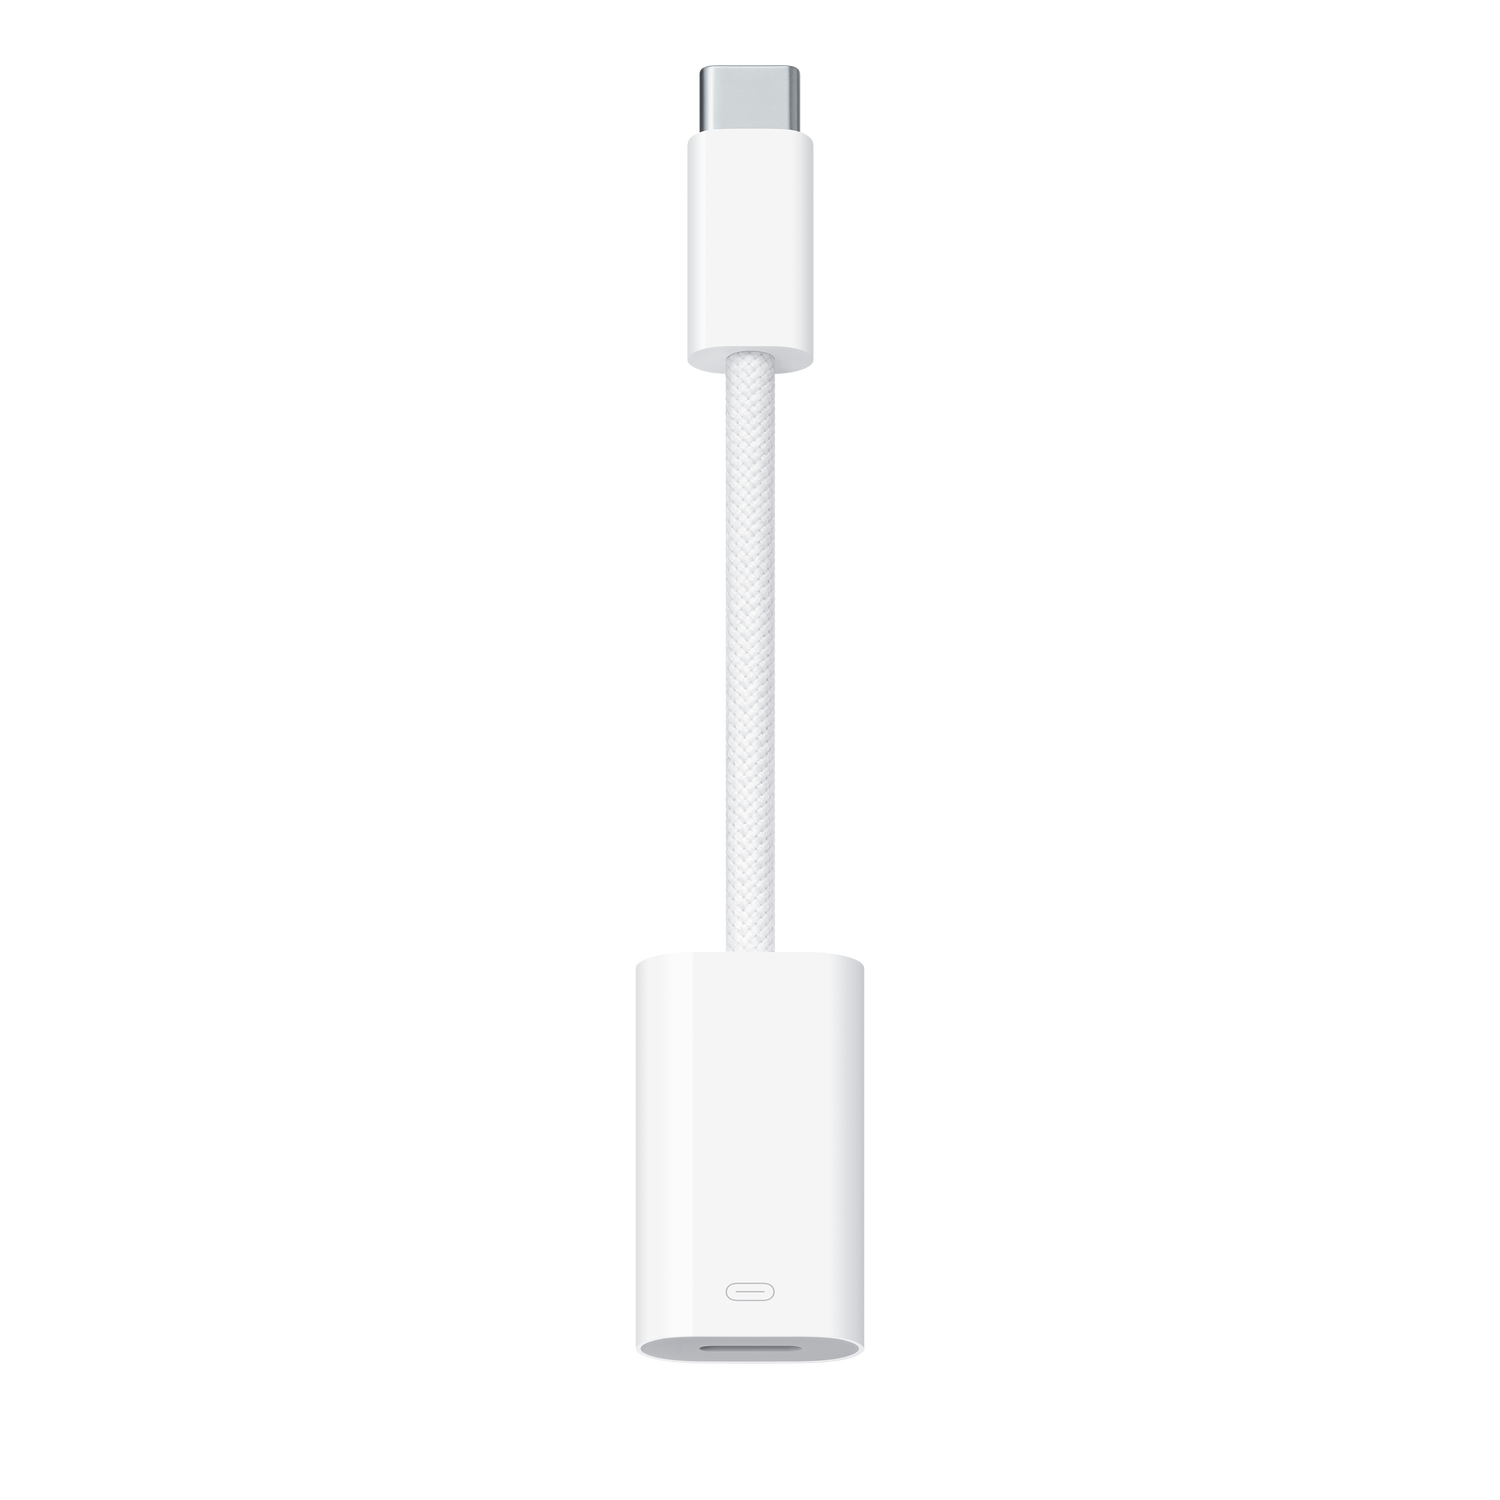 apl_ps_USB-C to Lightning Adapter